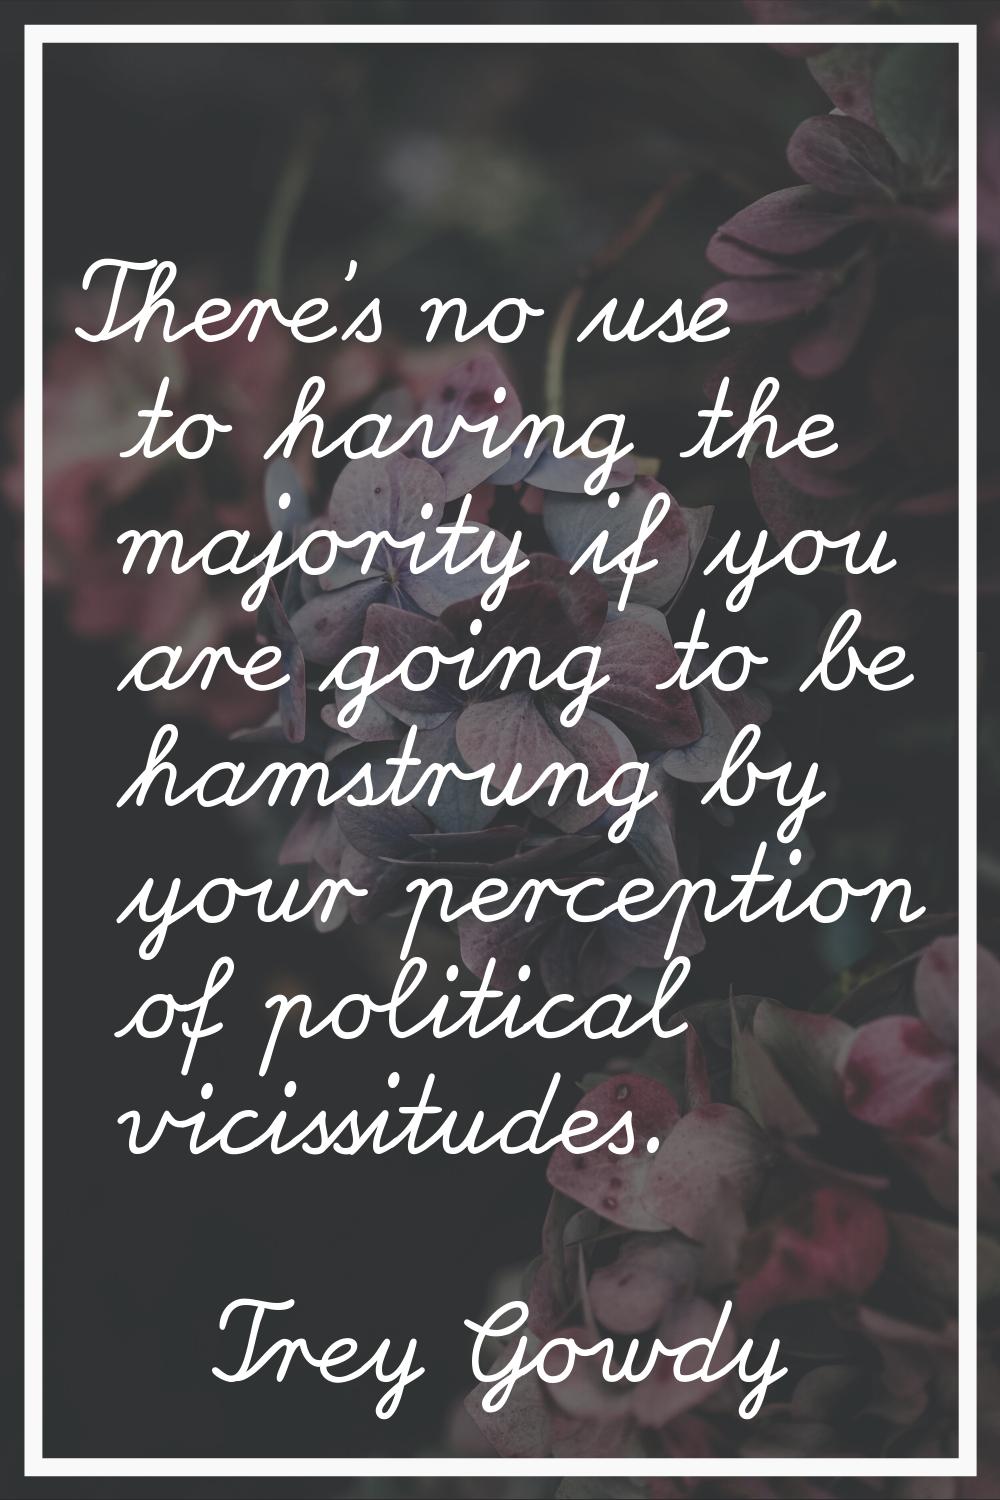 There's no use to having the majority if you are going to be hamstrung by your perception of politi